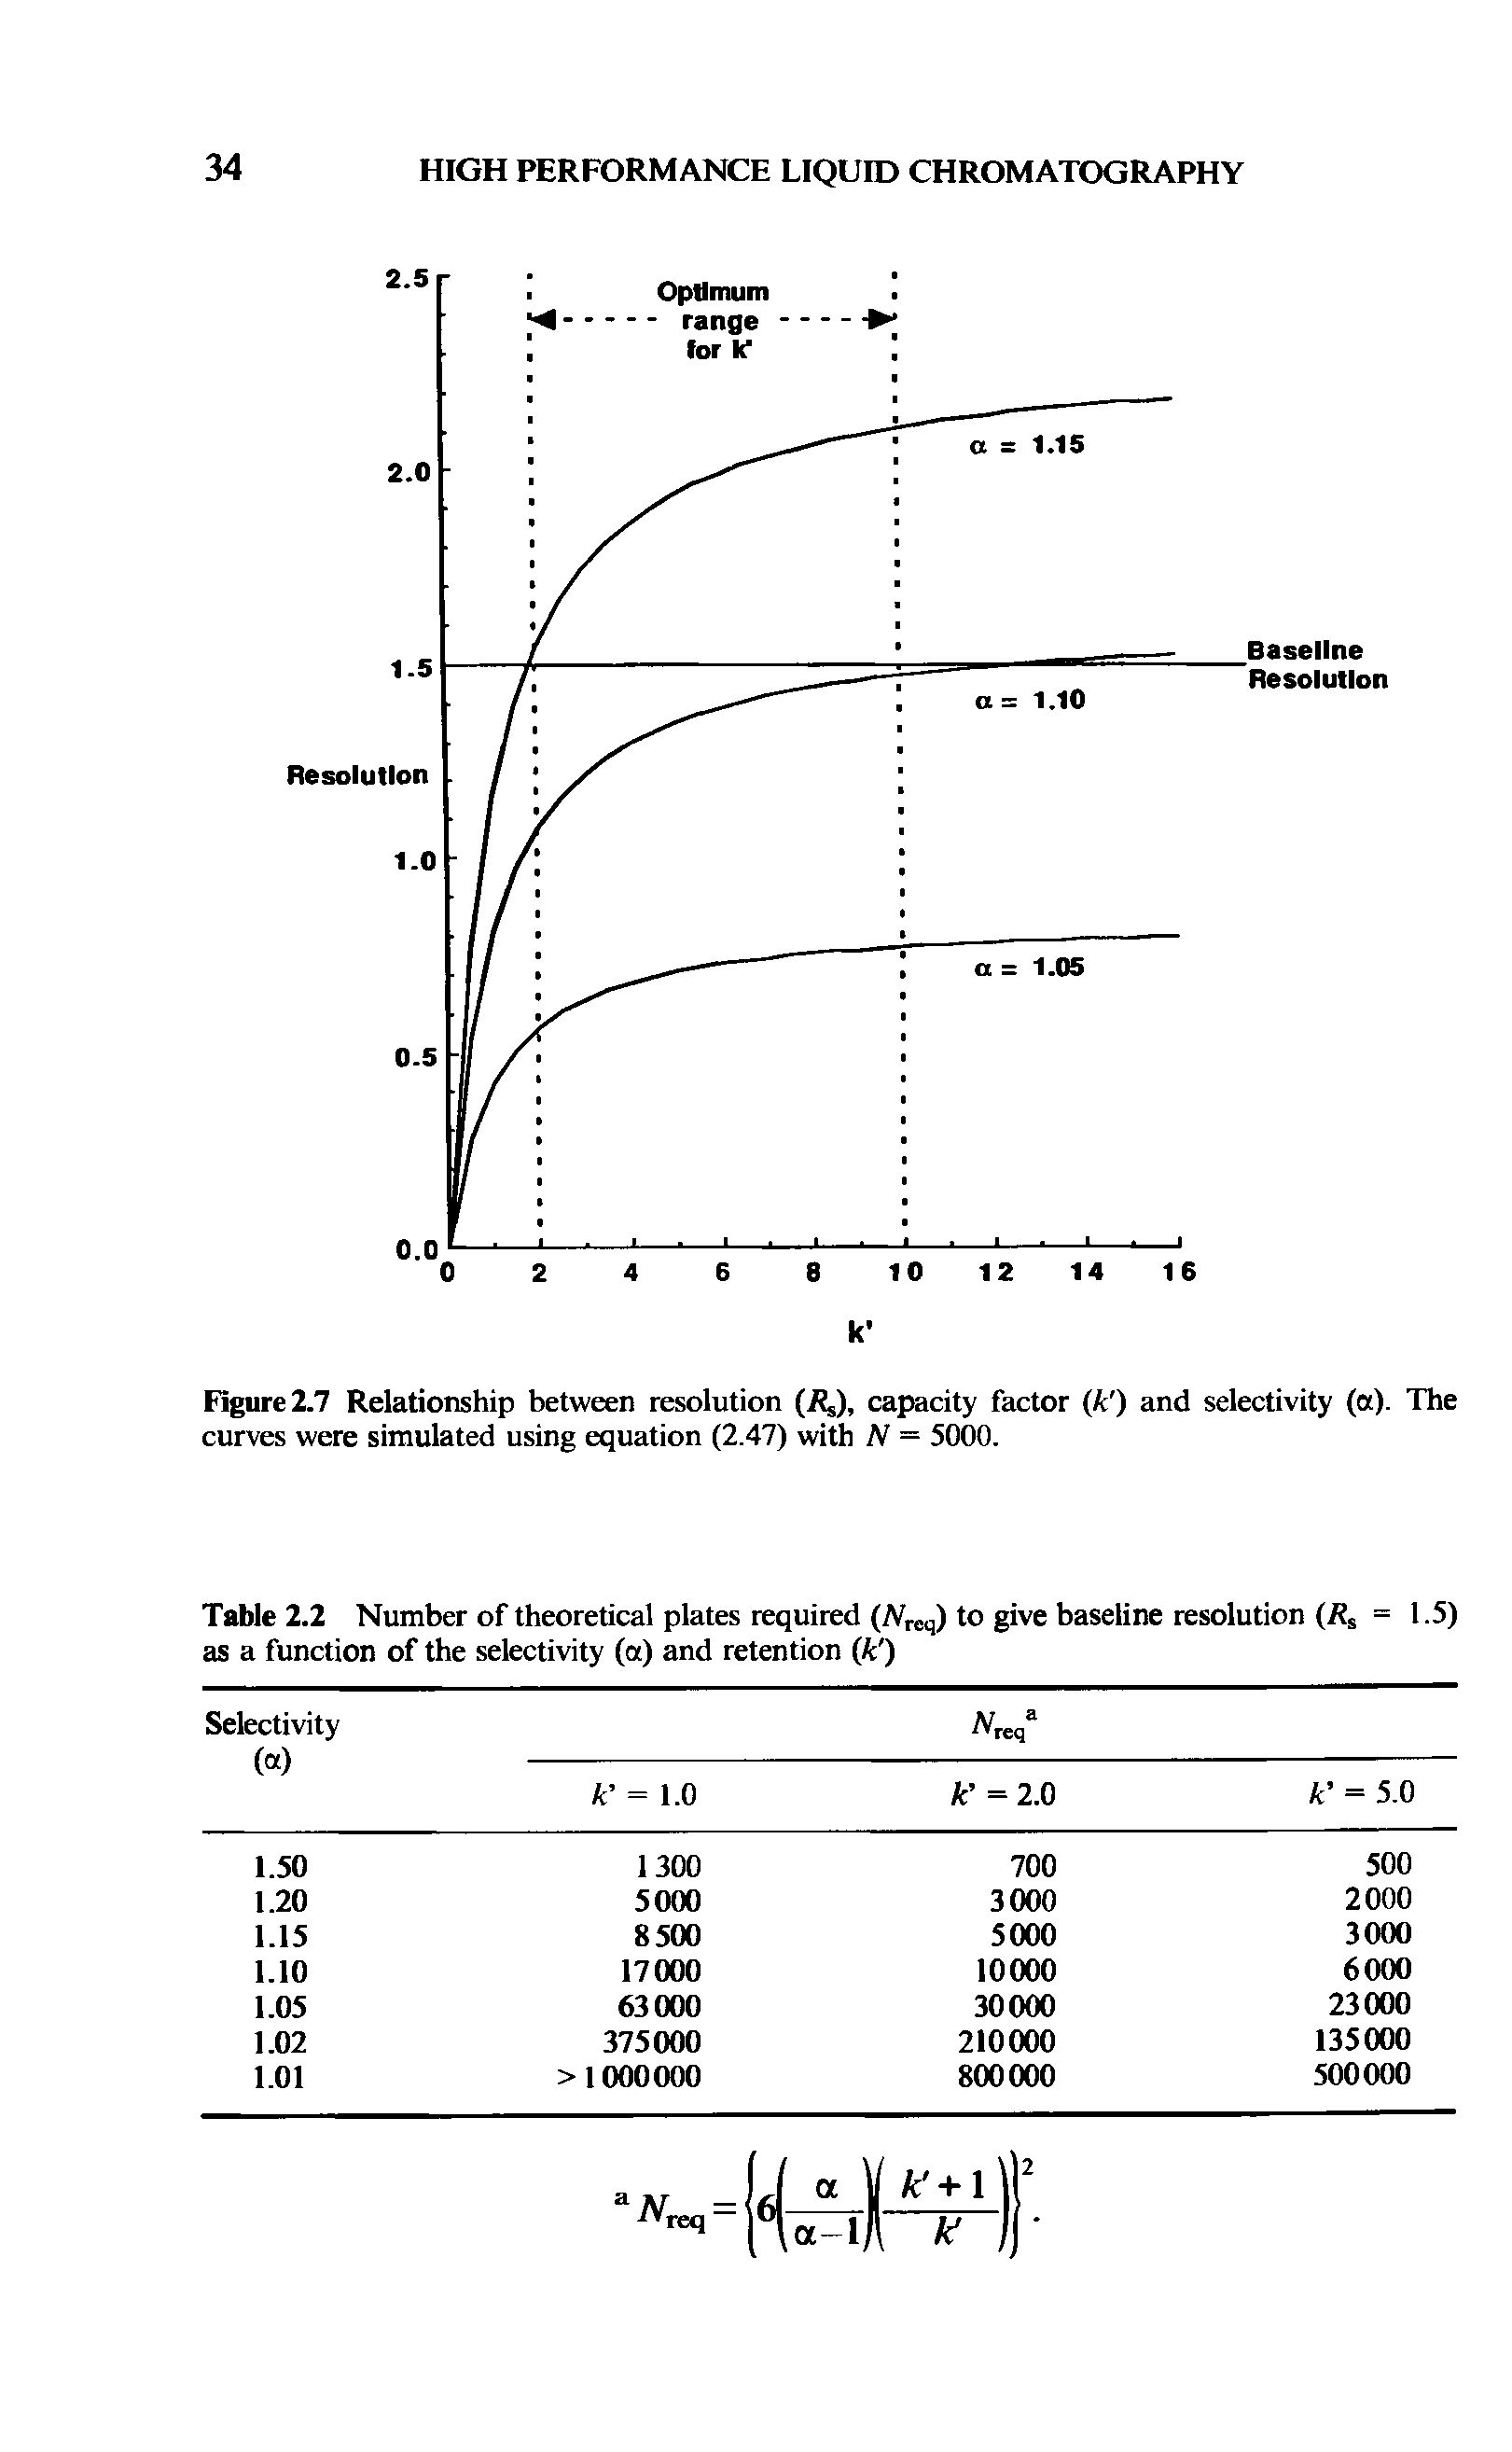 Table 2.2 Number of theoretical plates required (Areq) to give baseline resolution (R = 1.5) as a function of the selectivity (a) and retention k )...